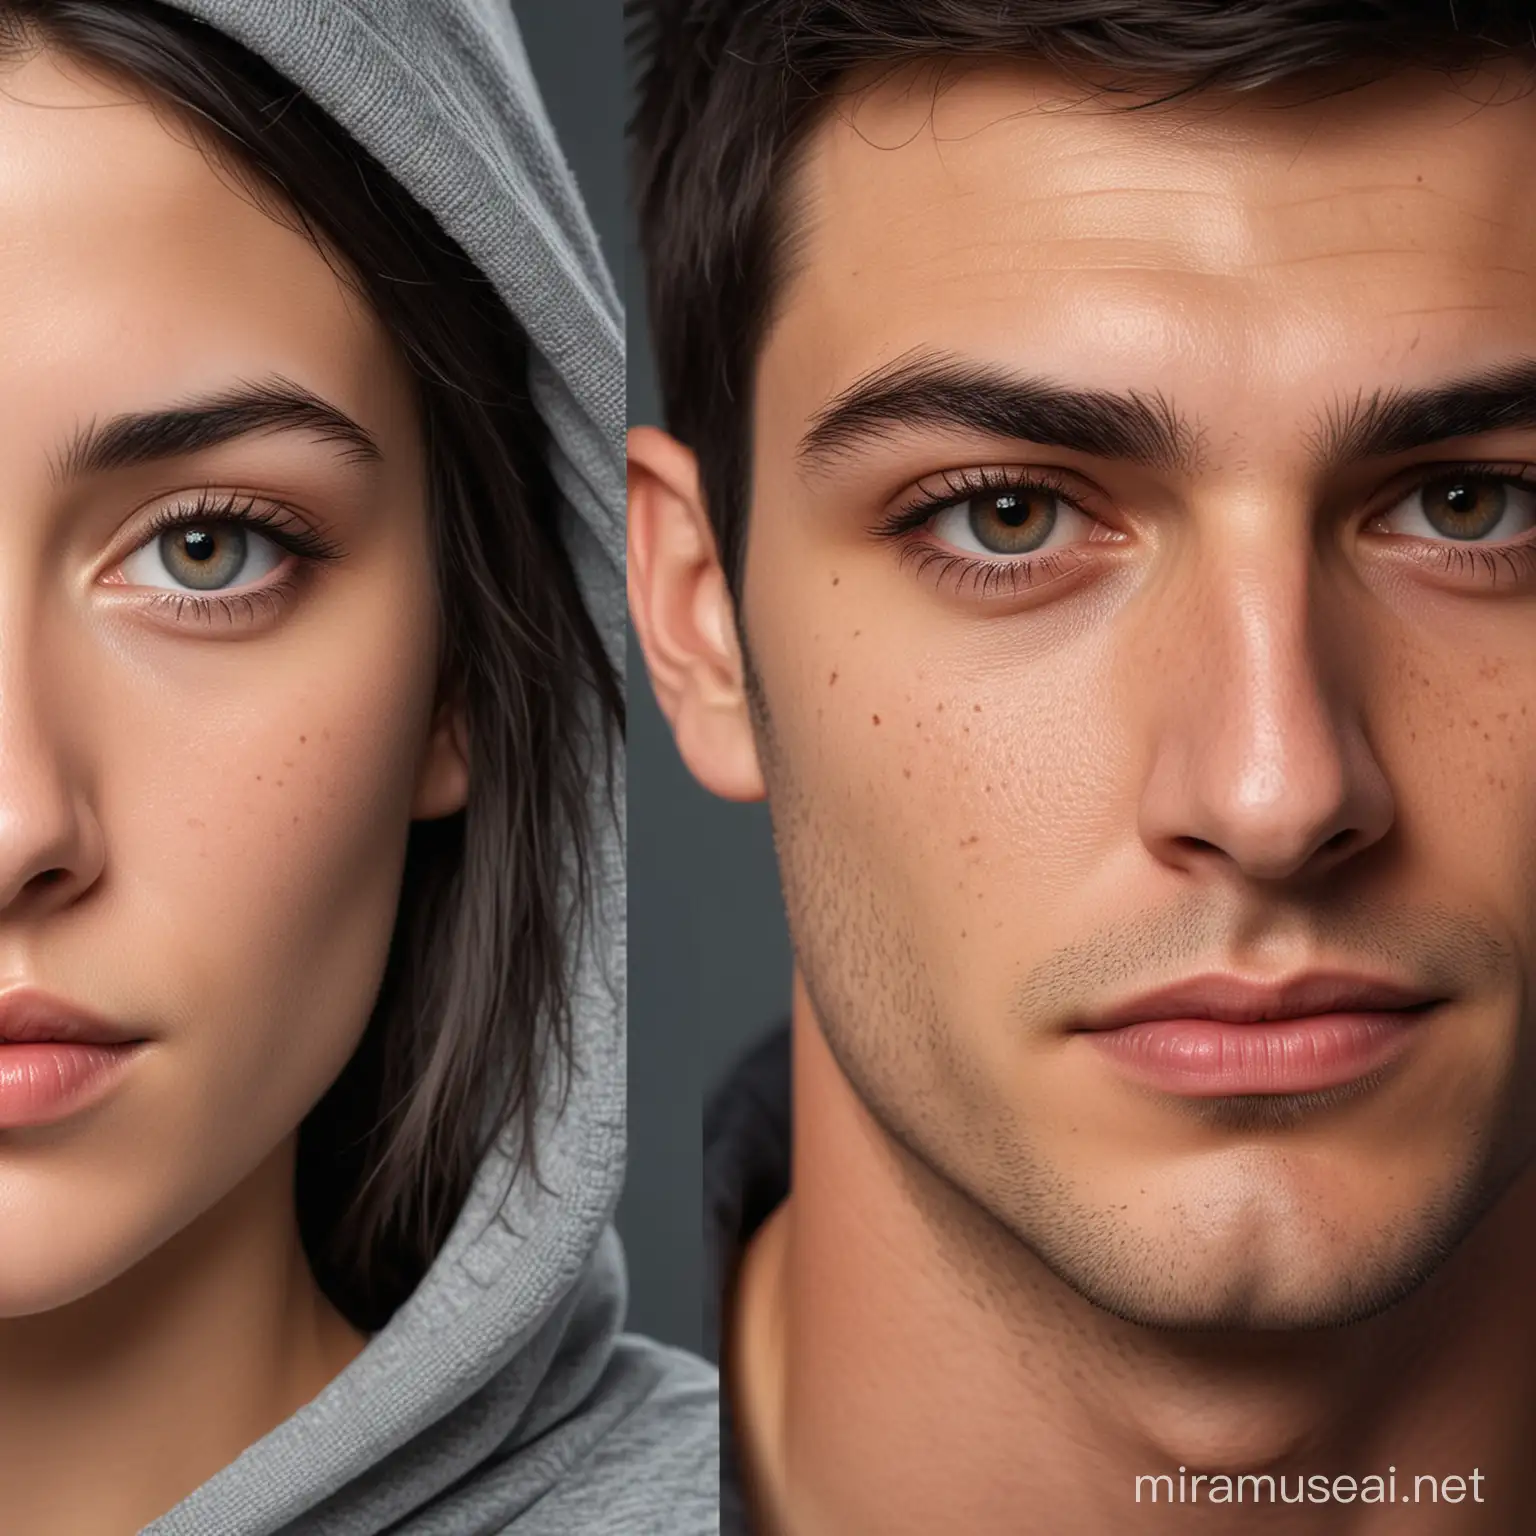 Contrasting Portraits CleanShaven Woman and GrimLooking Man in SplitScreen Photo